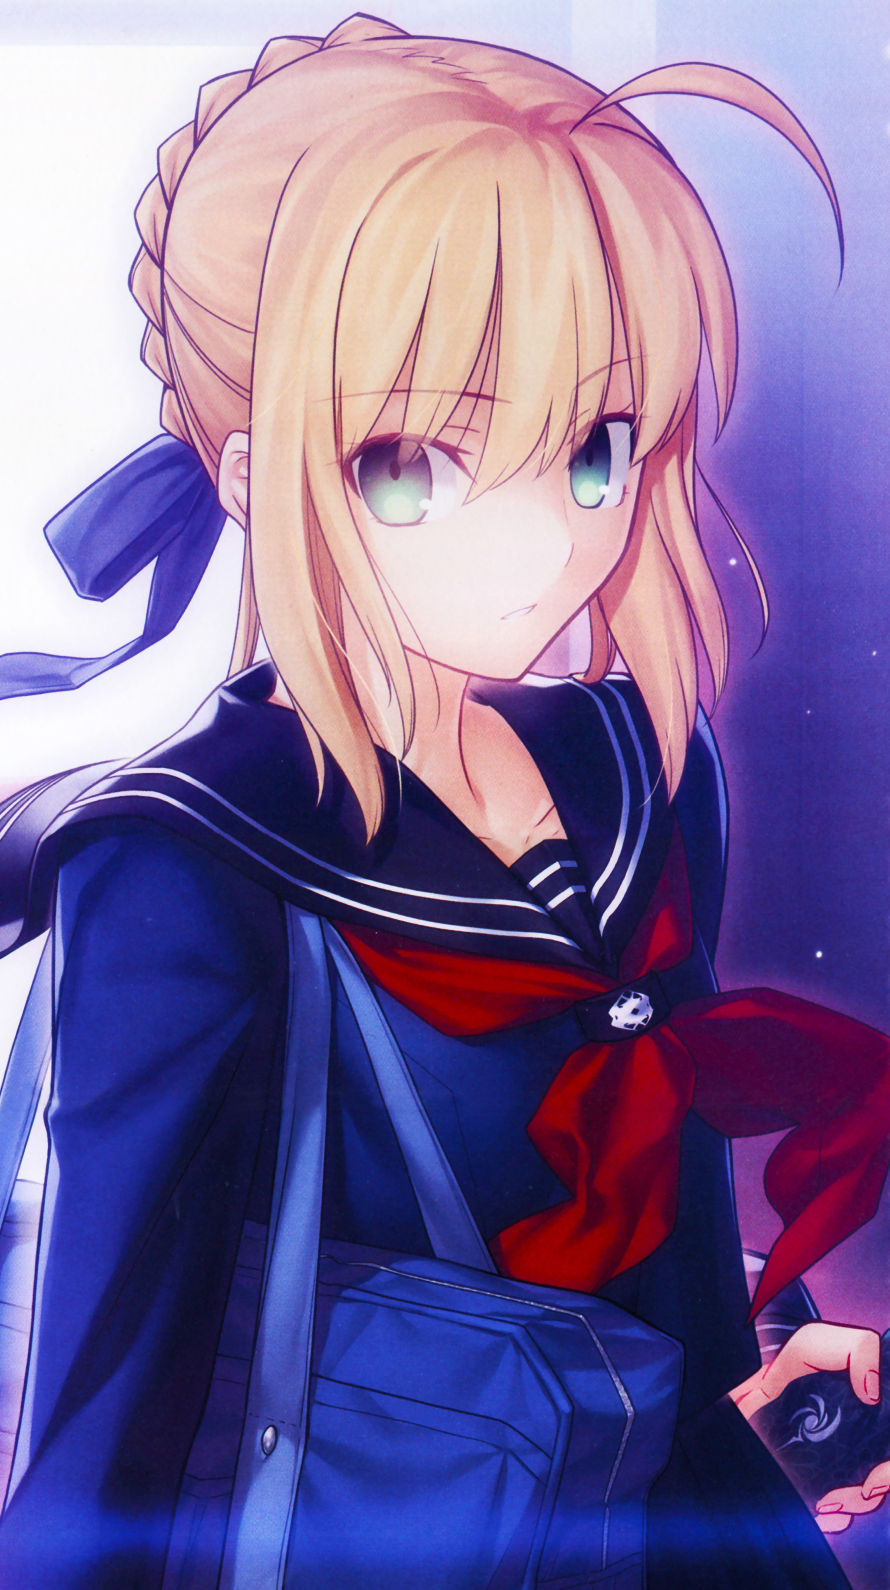 Fate Iphone壁紙画像 Androidスマホ壁紙 2 セイバー Iphone6 Iphone5s アニメ壁紙ネット Pc Android Iphone壁紙 画像